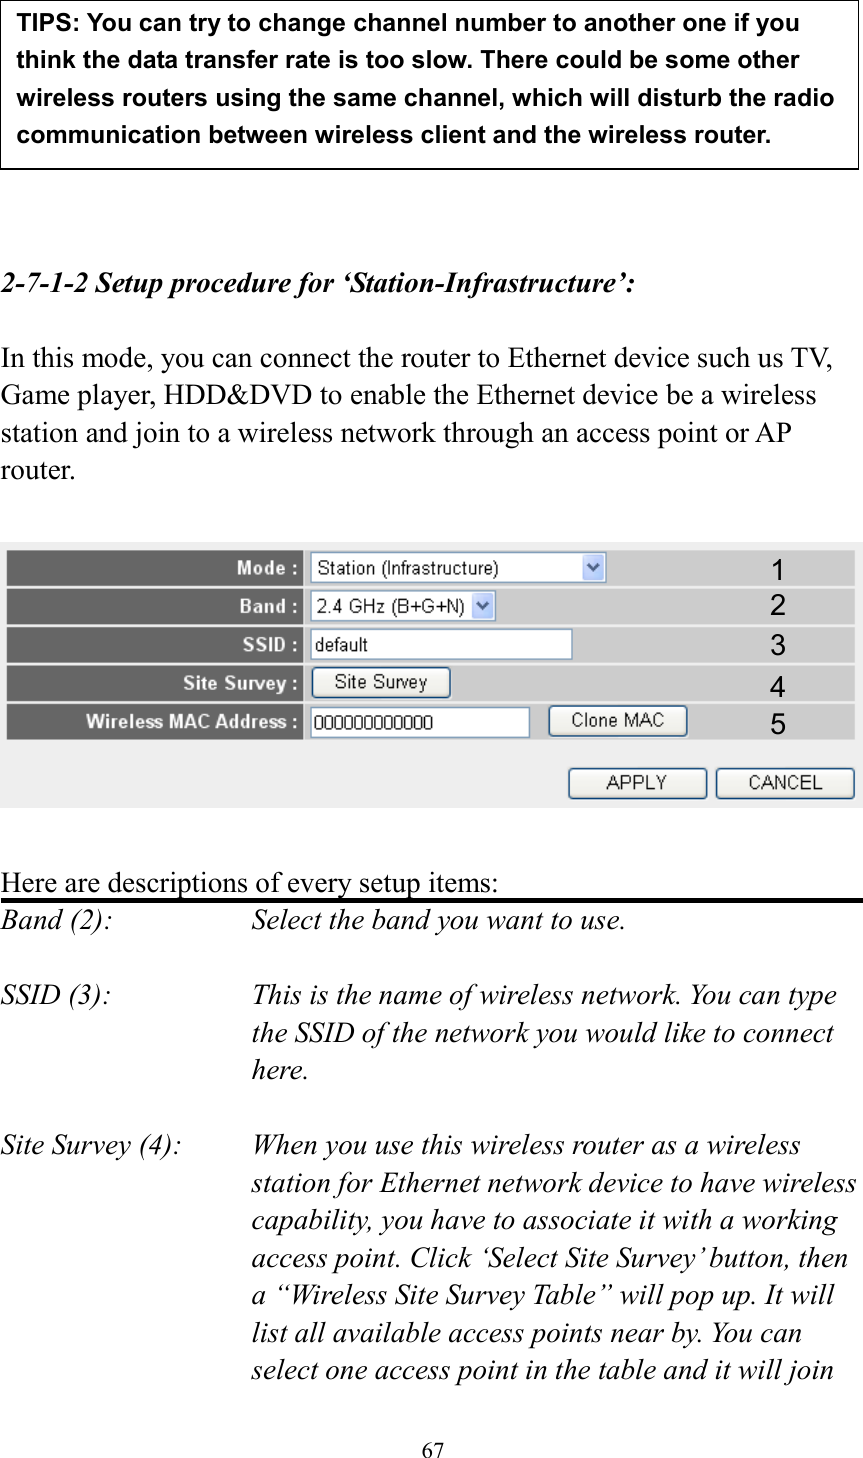 67         2-7-1-2 Setup procedure for ‘Station-Infrastructure’:  In this mode, you can connect the router to Ethernet device such us TV, Game player, HDD&amp;DVD to enable the Ethernet device be a wireless station and join to a wireless network through an access point or AP router.    Here are descriptions of every setup items: Band (2):  Select the band you want to use.  SSID (3):  This is the name of wireless network. You can type the SSID of the network you would like to connect here.  Site Survey (4):  When you use this wireless router as a wireless station for Ethernet network device to have wireless capability, you have to associate it with a working access point. Click ‘Select Site Survey’ button, then a “Wireless Site Survey Table” will pop up. It will list all available access points near by. You can select one access point in the table and it will join TIPS: You can try to change channel number to another one if you think the data transfer rate is too slow. There could be some other wireless routers using the same channel, which will disturb the radio communication between wireless client and the wireless router. 1 2 3 4 5 